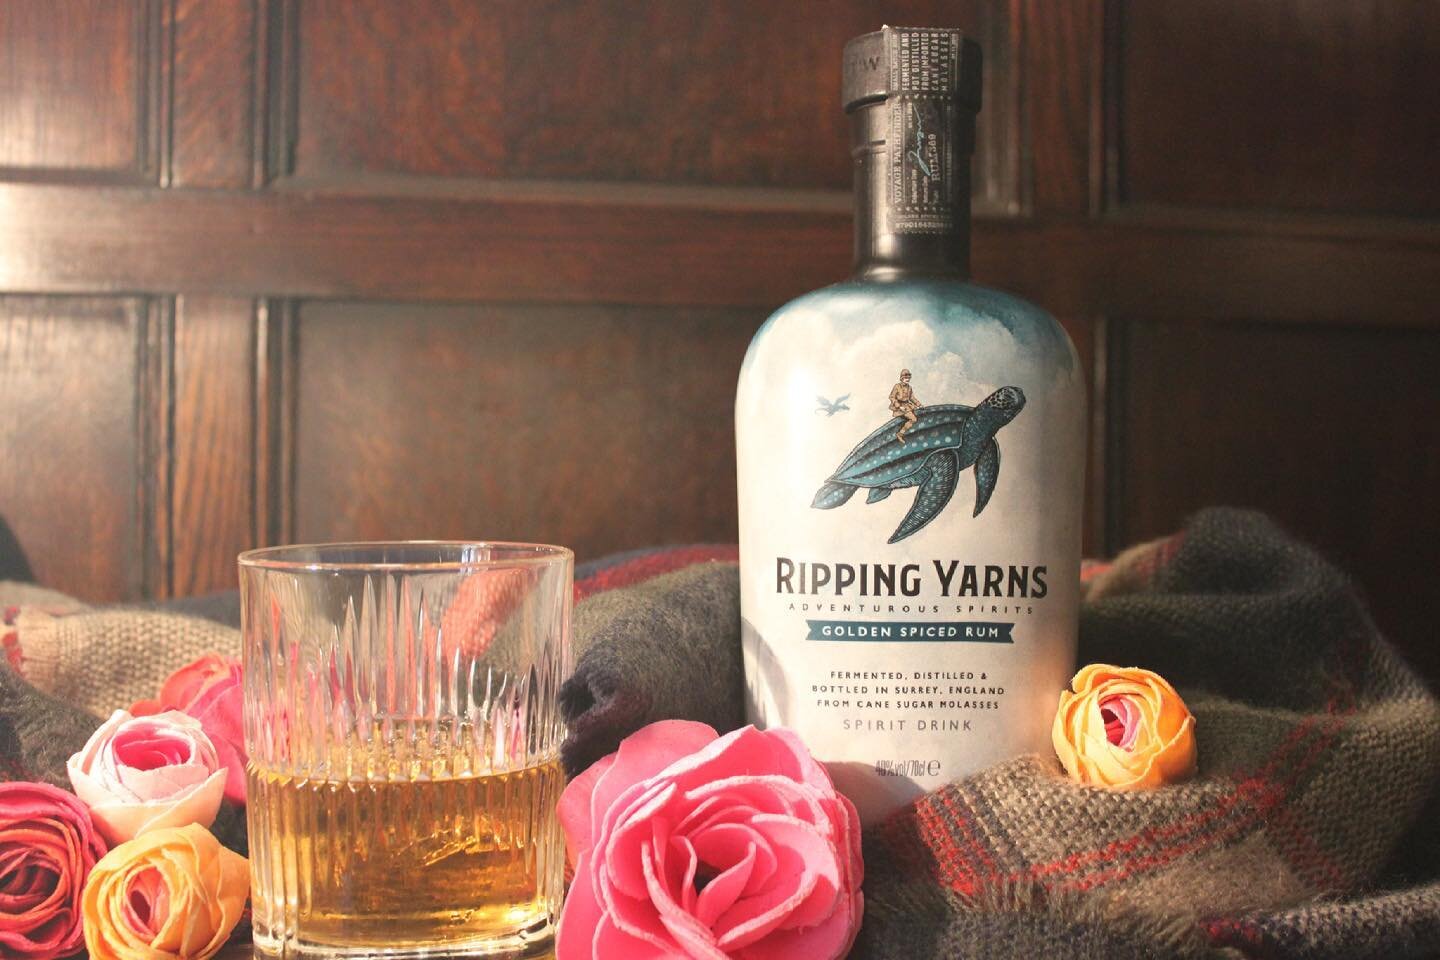 A special gift for MOTHERS DAY! 💕 
To celebrate all Mums, there&rsquo;s 10% OFF our AWARD WINNING GOLDEN SPICED RUM! Share the love and order before midnight Tuesday 9th of March with code: MUM1.  Best shared with Family and Friends. &bull;
&bull;
&